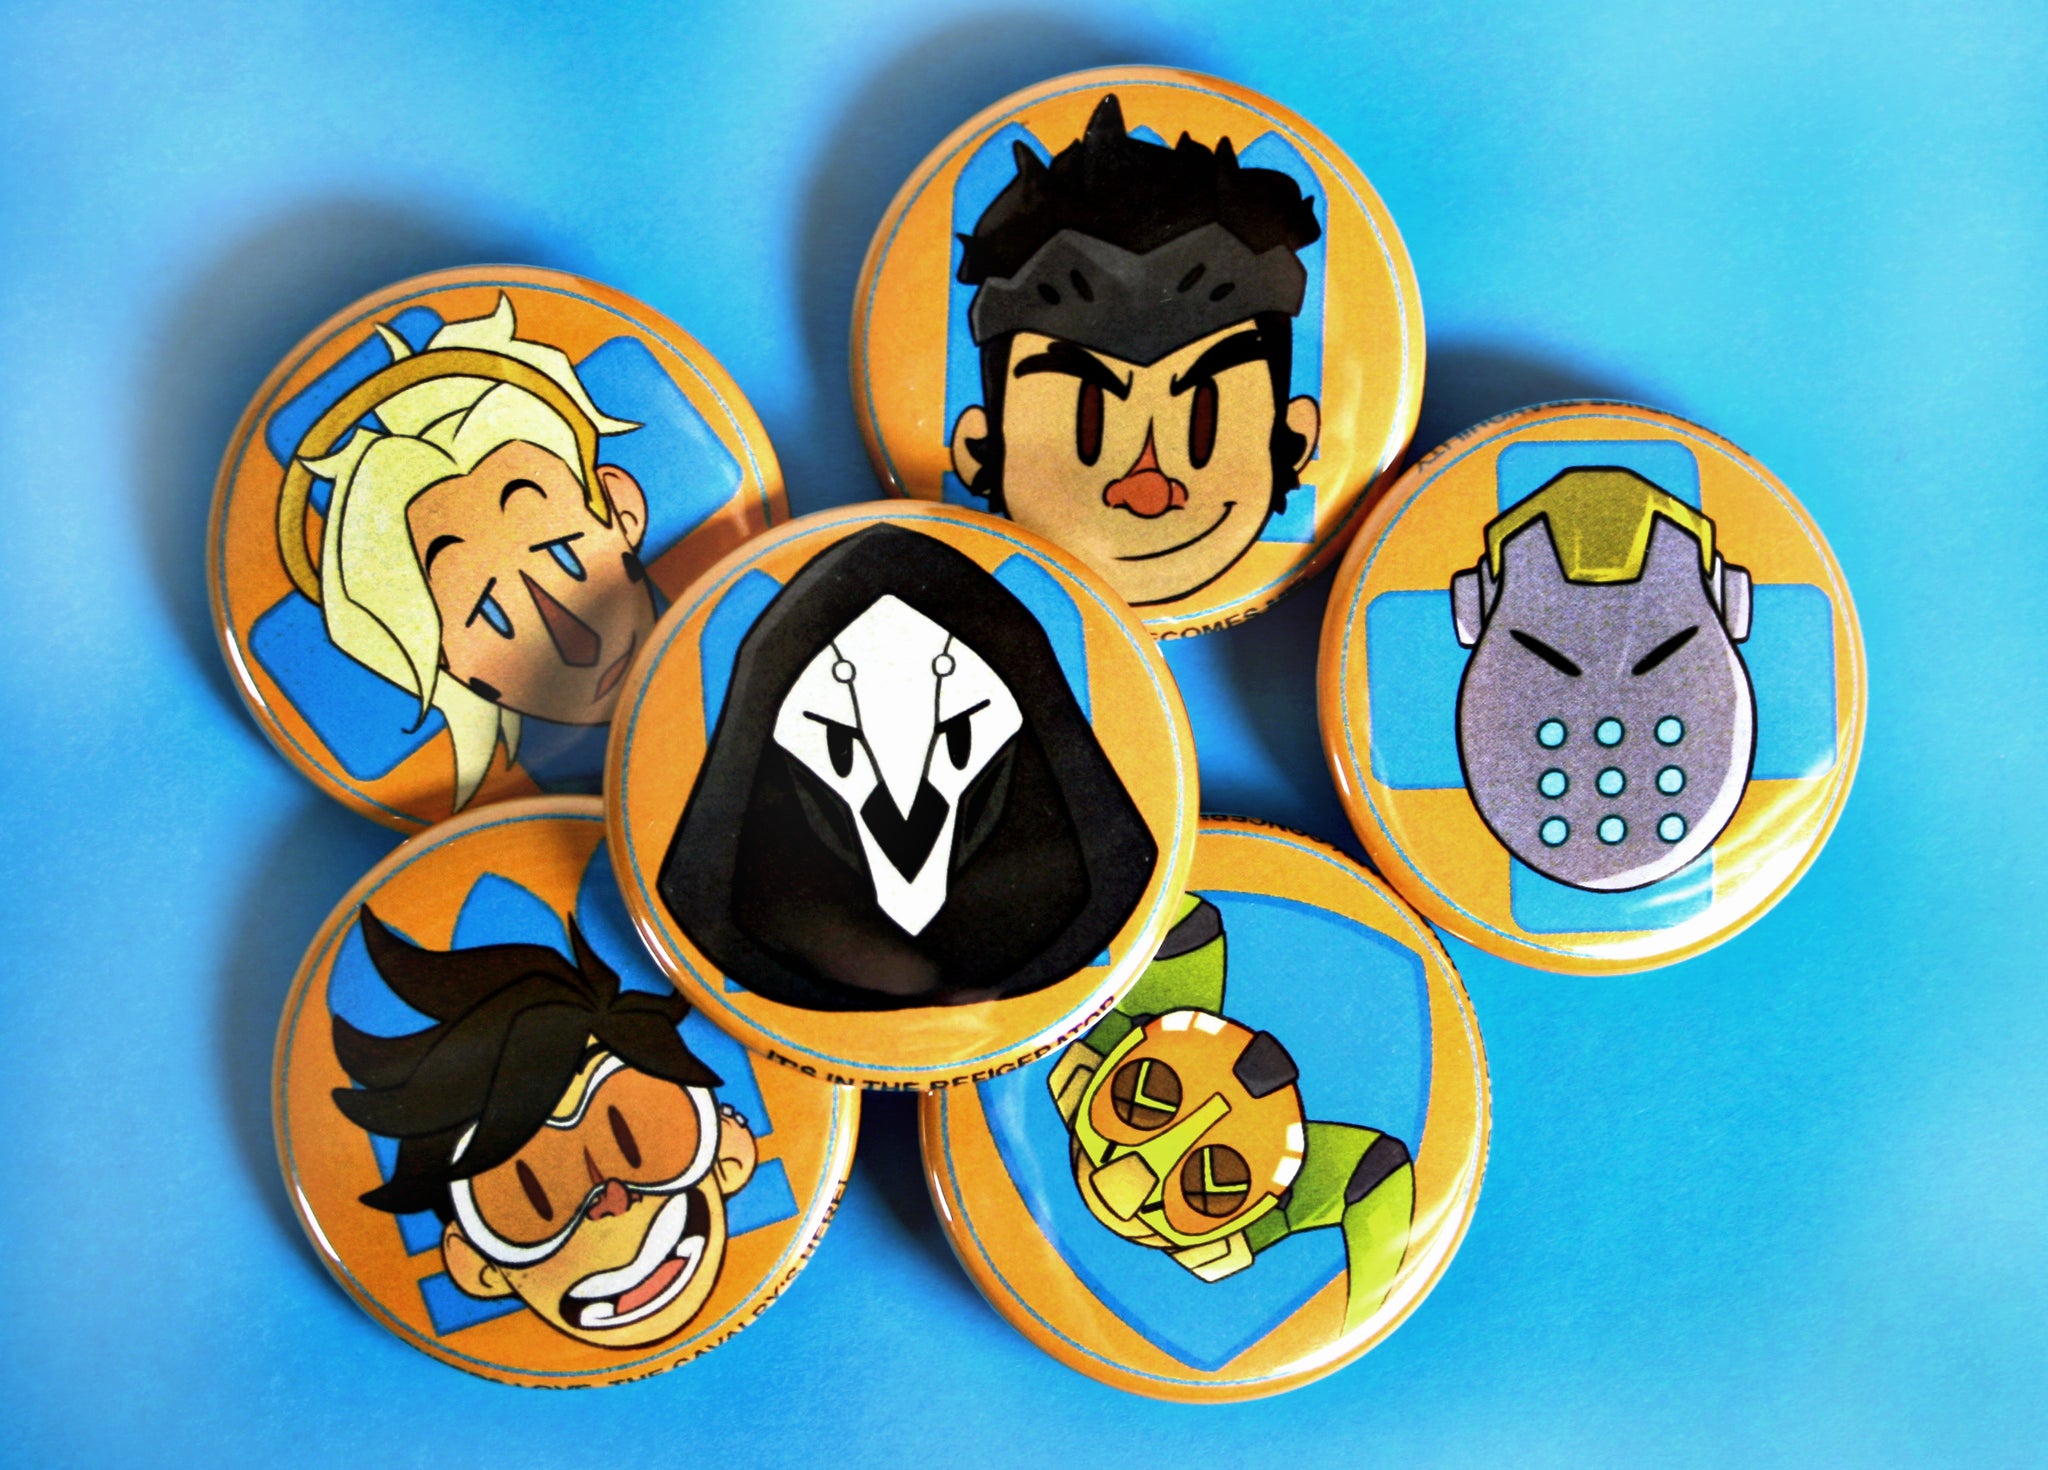 Northern-Gaming-Expo-Buttons-Overwatch